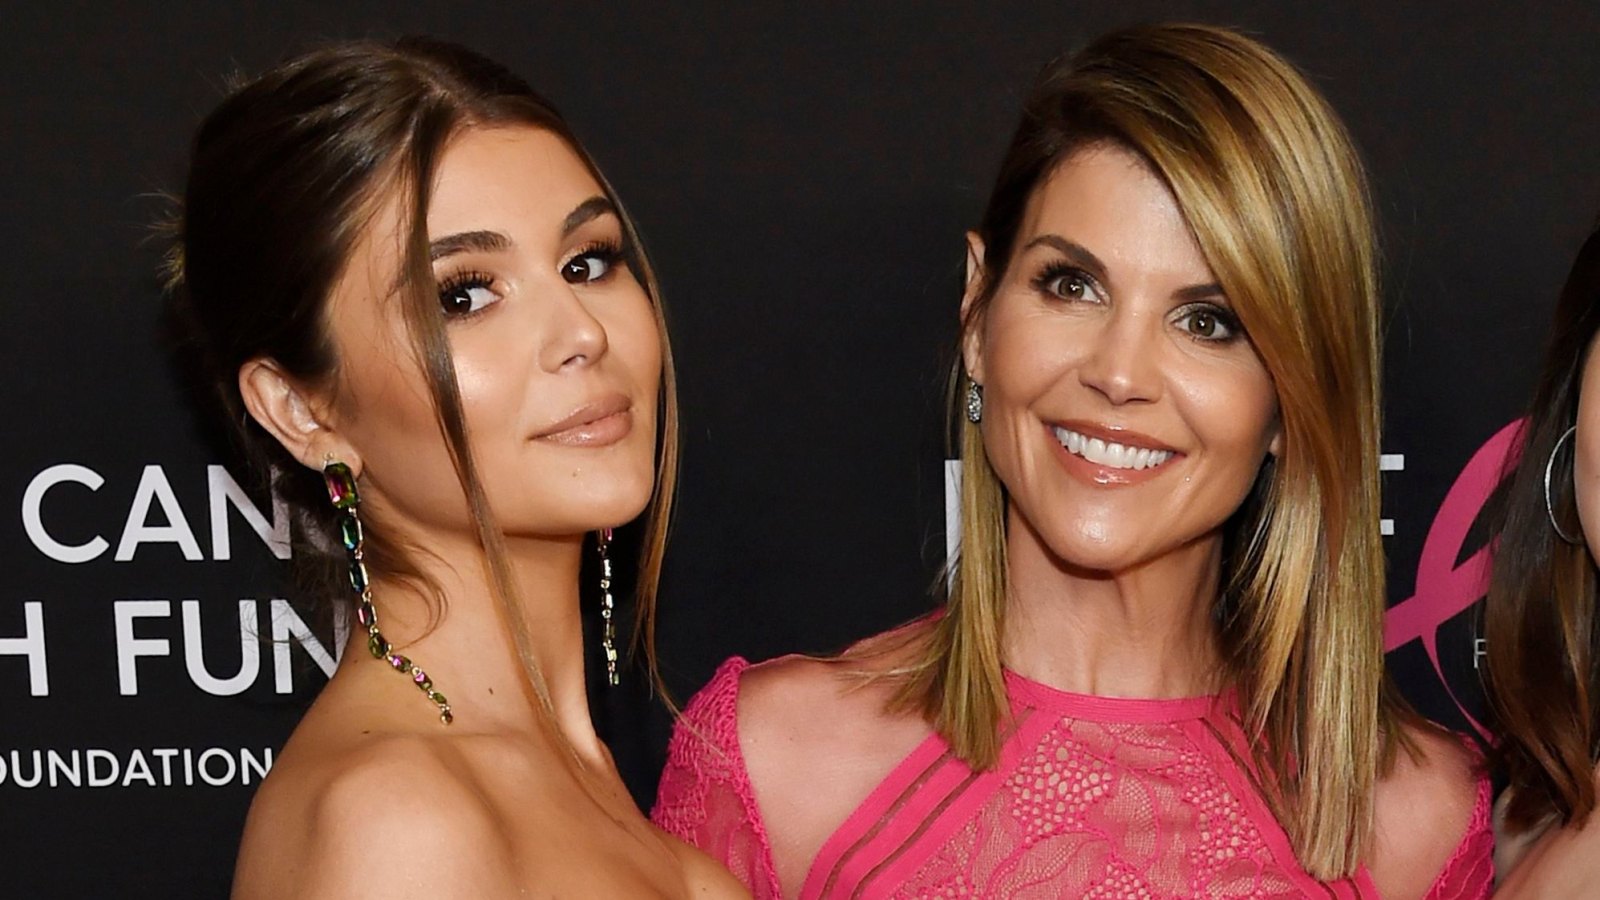 Lori Loughlin’s Daughter Olivia Jade Giannulli Joins Cast of ‘DWTS’